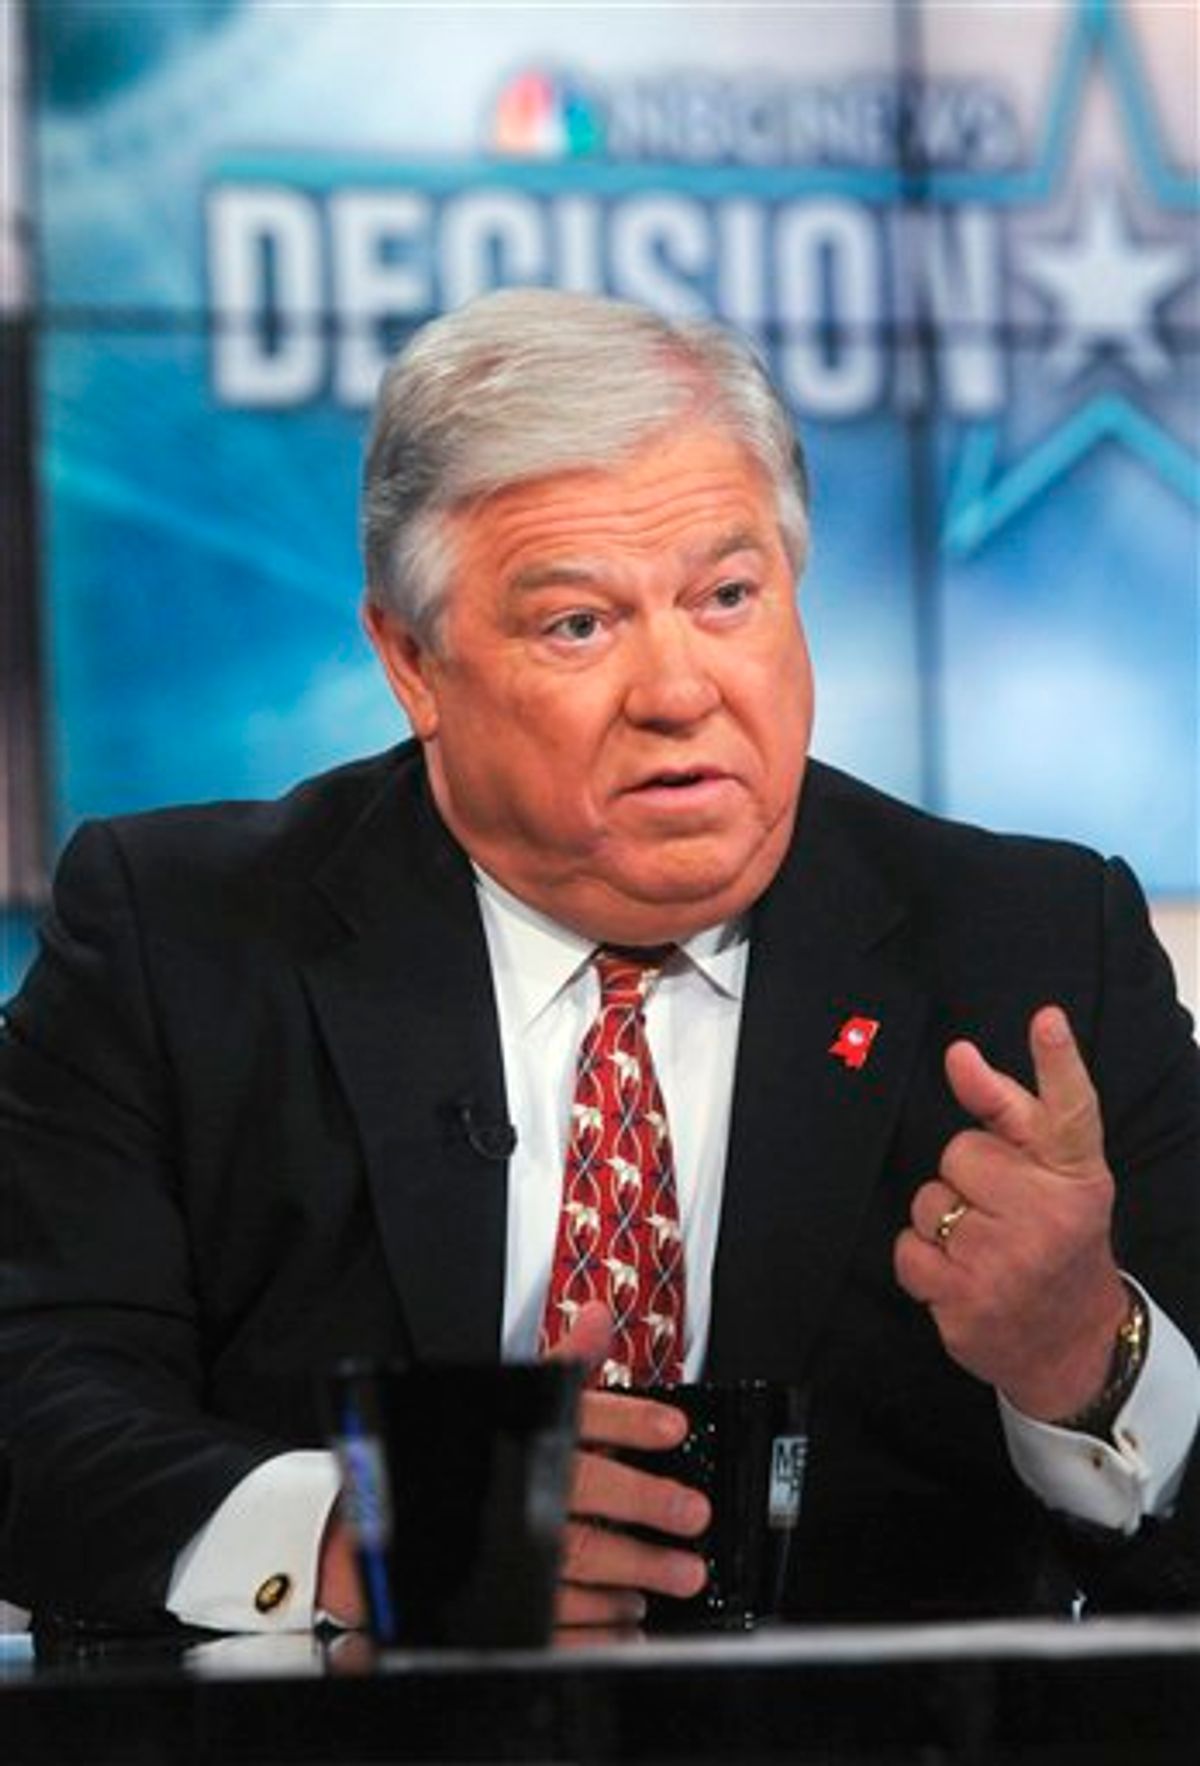 In this image, released by NBC, Republican Governors Association Chairman and Mississippi Gov. Haley Barbour talks on NBC's Meet the Press in Washington Sunday, Oct. 31, 2010. (AP Photo/NBC, William B. Plowman)  NO ARCHIVES. NO SALES (AP)